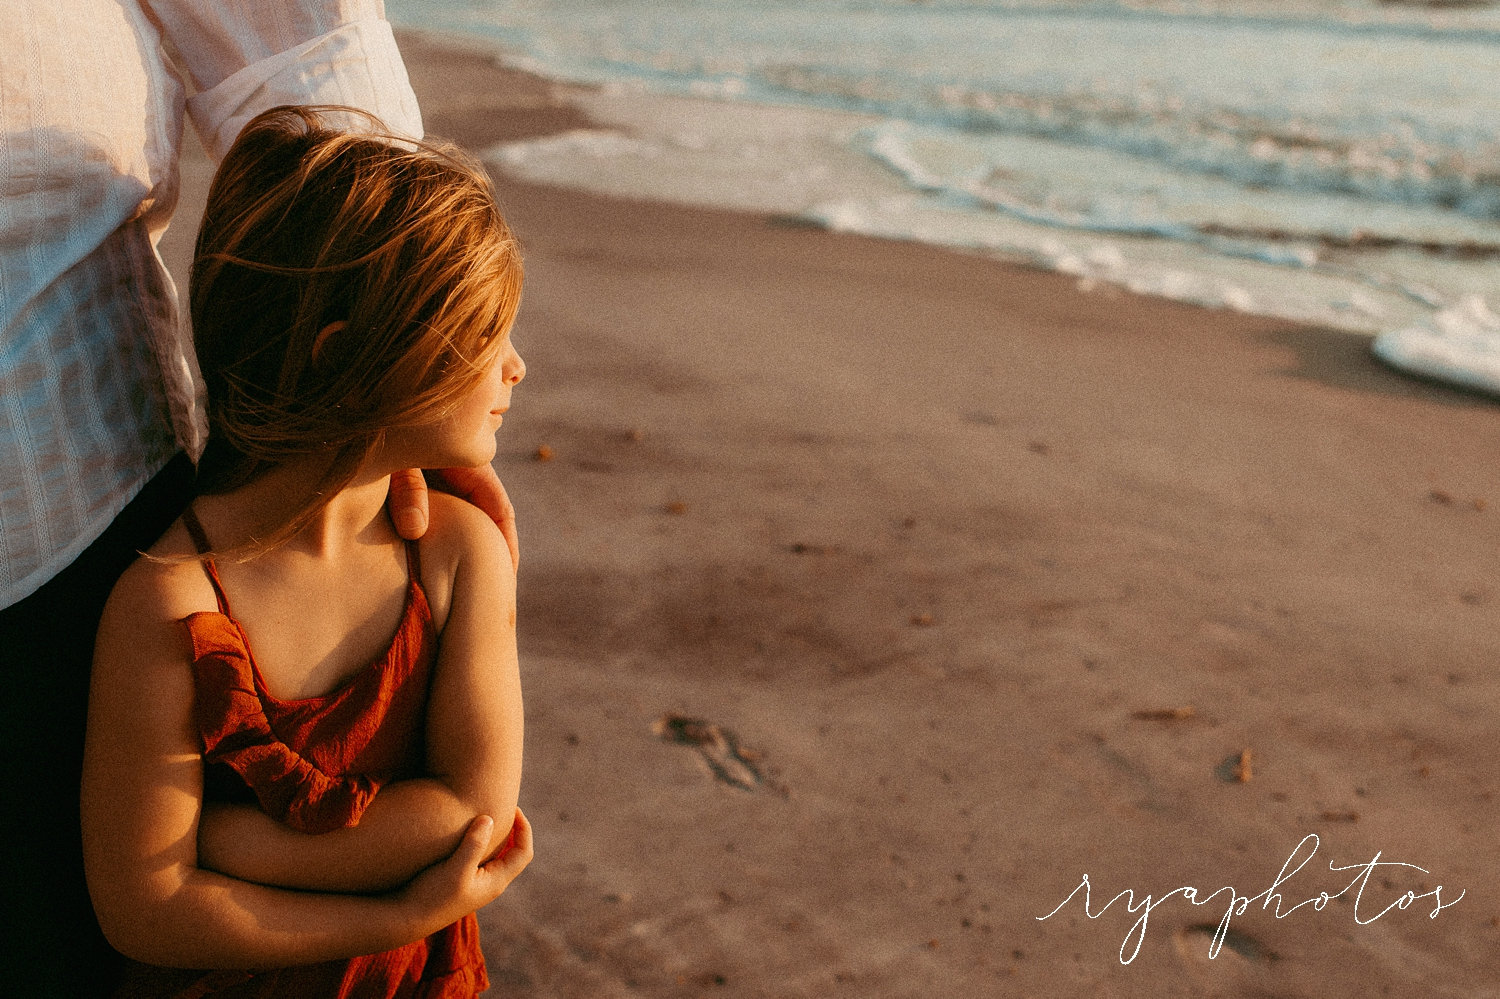 little girl in her father's arm, footprints in the sand, family beach photography, Ryaphotos